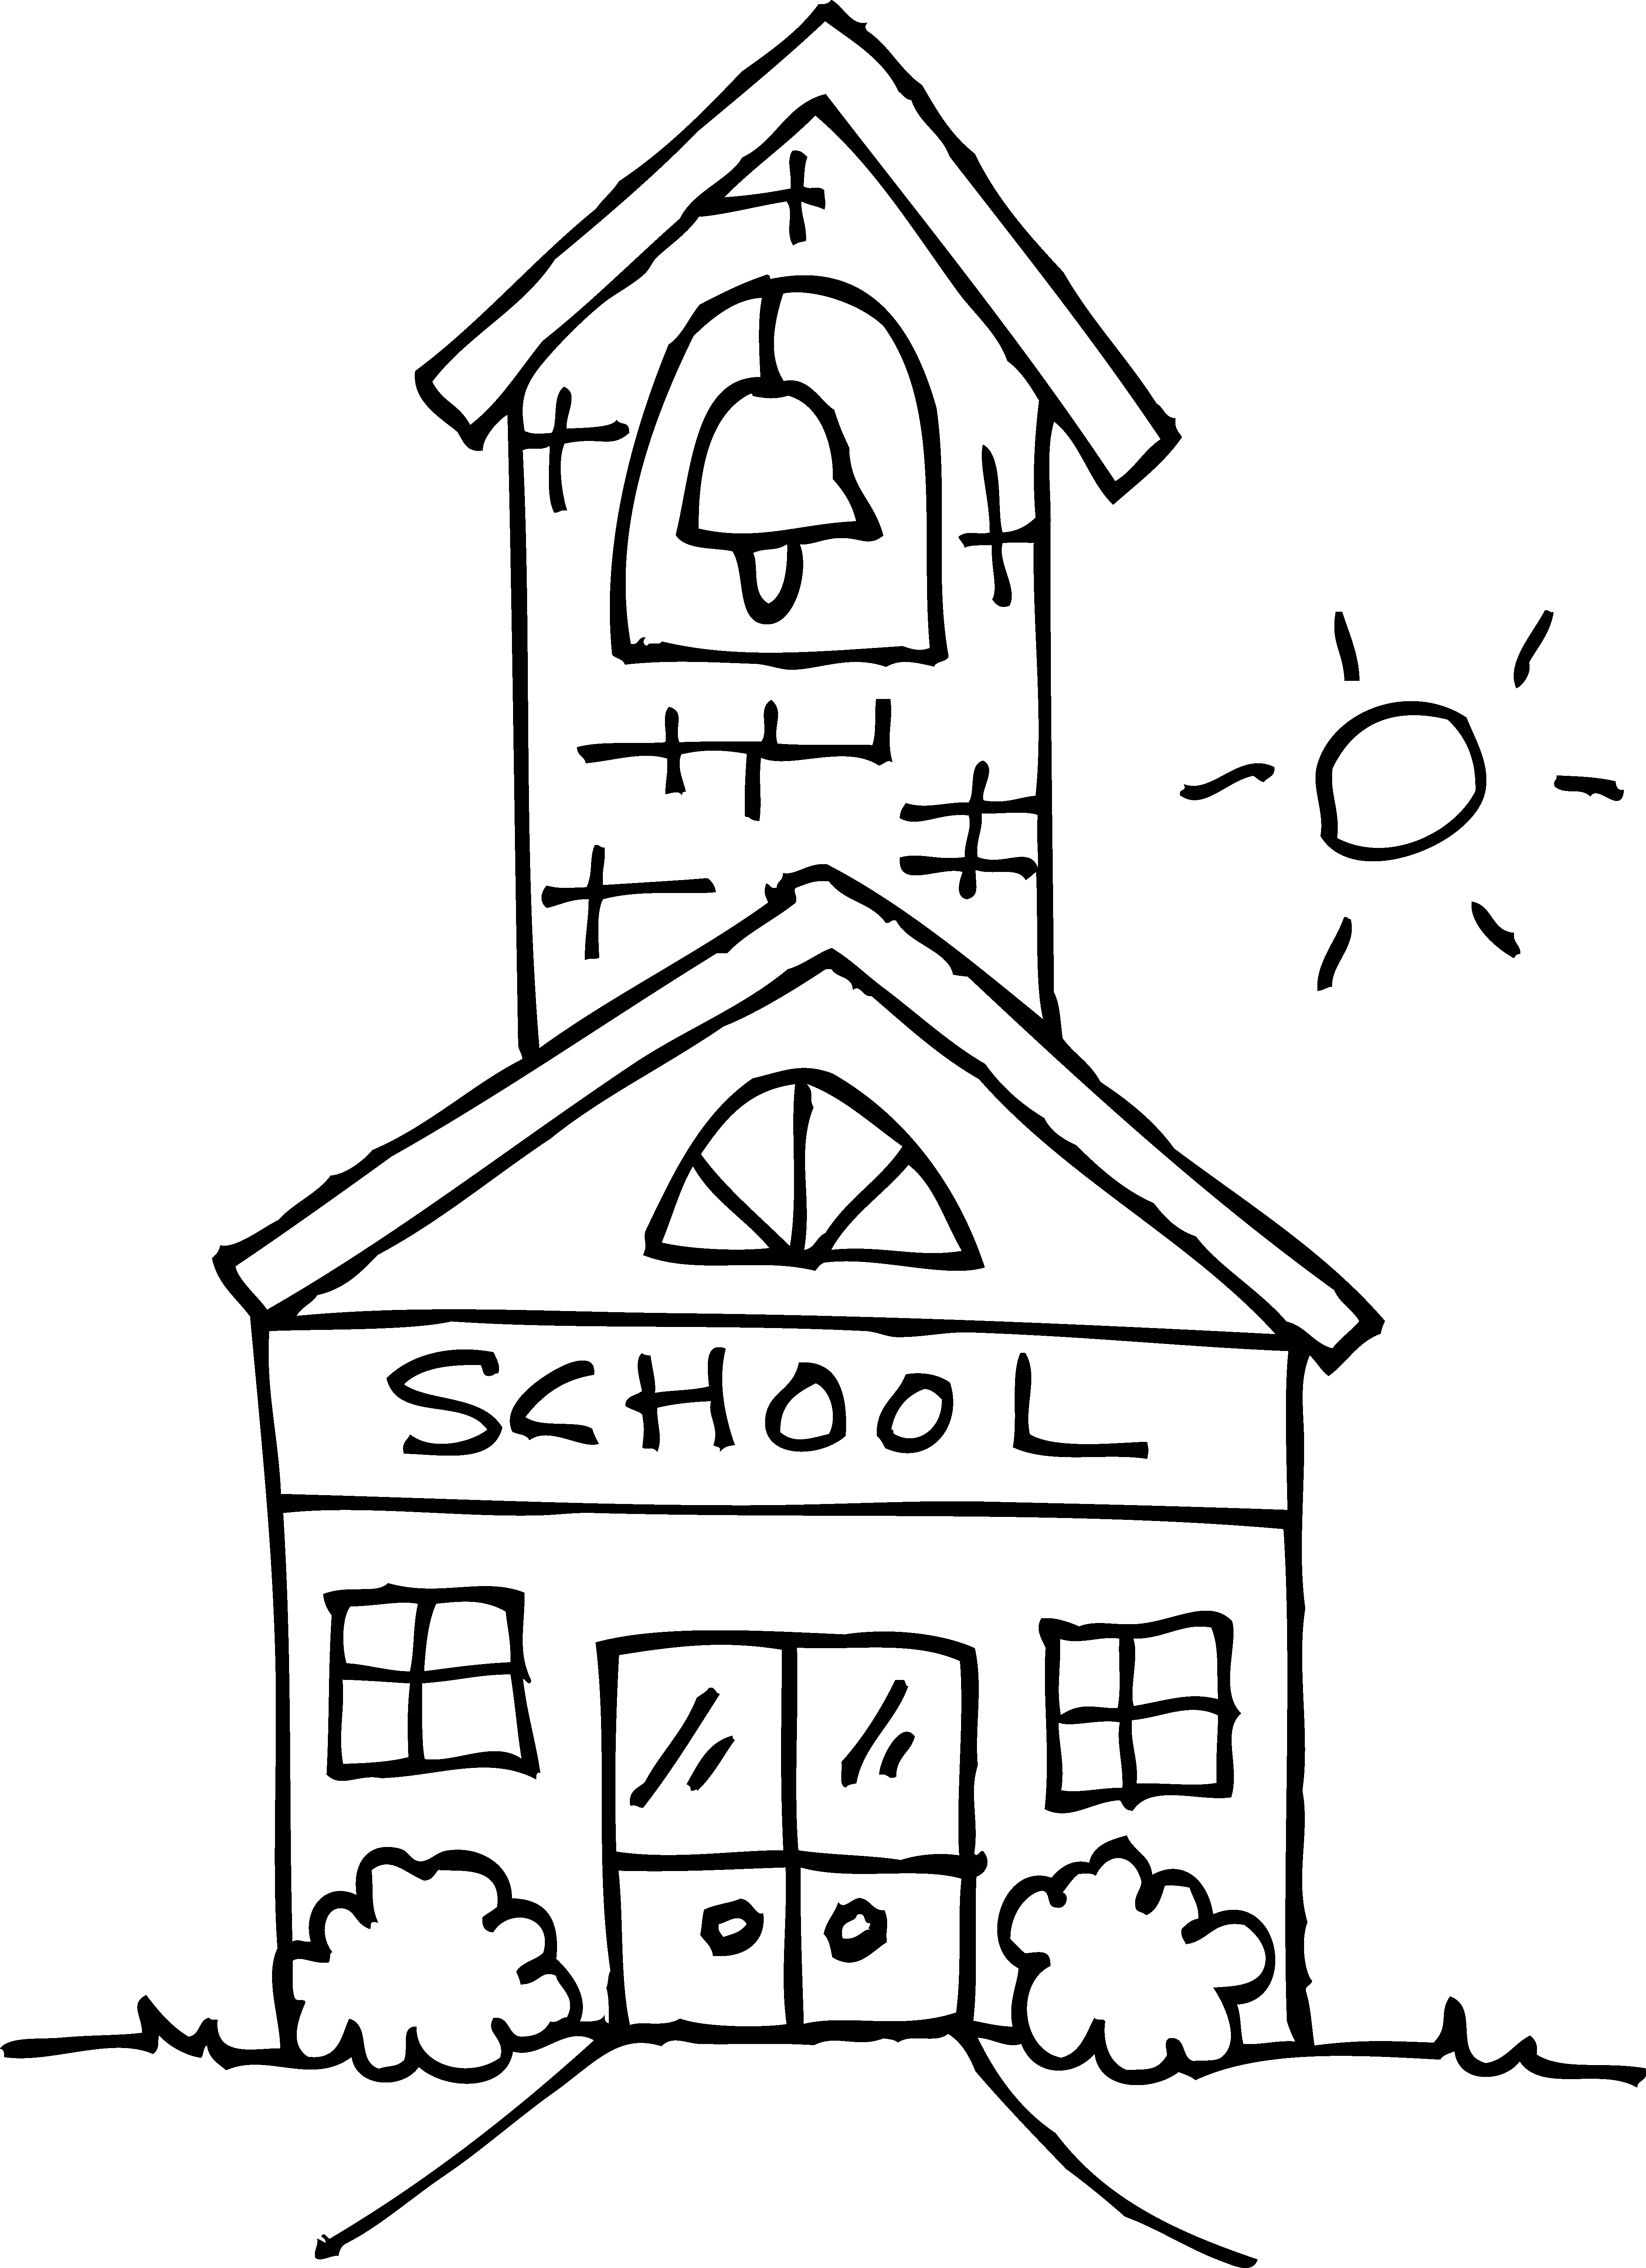 Cute Schoolhouse Coloring Page - Free Clip Art